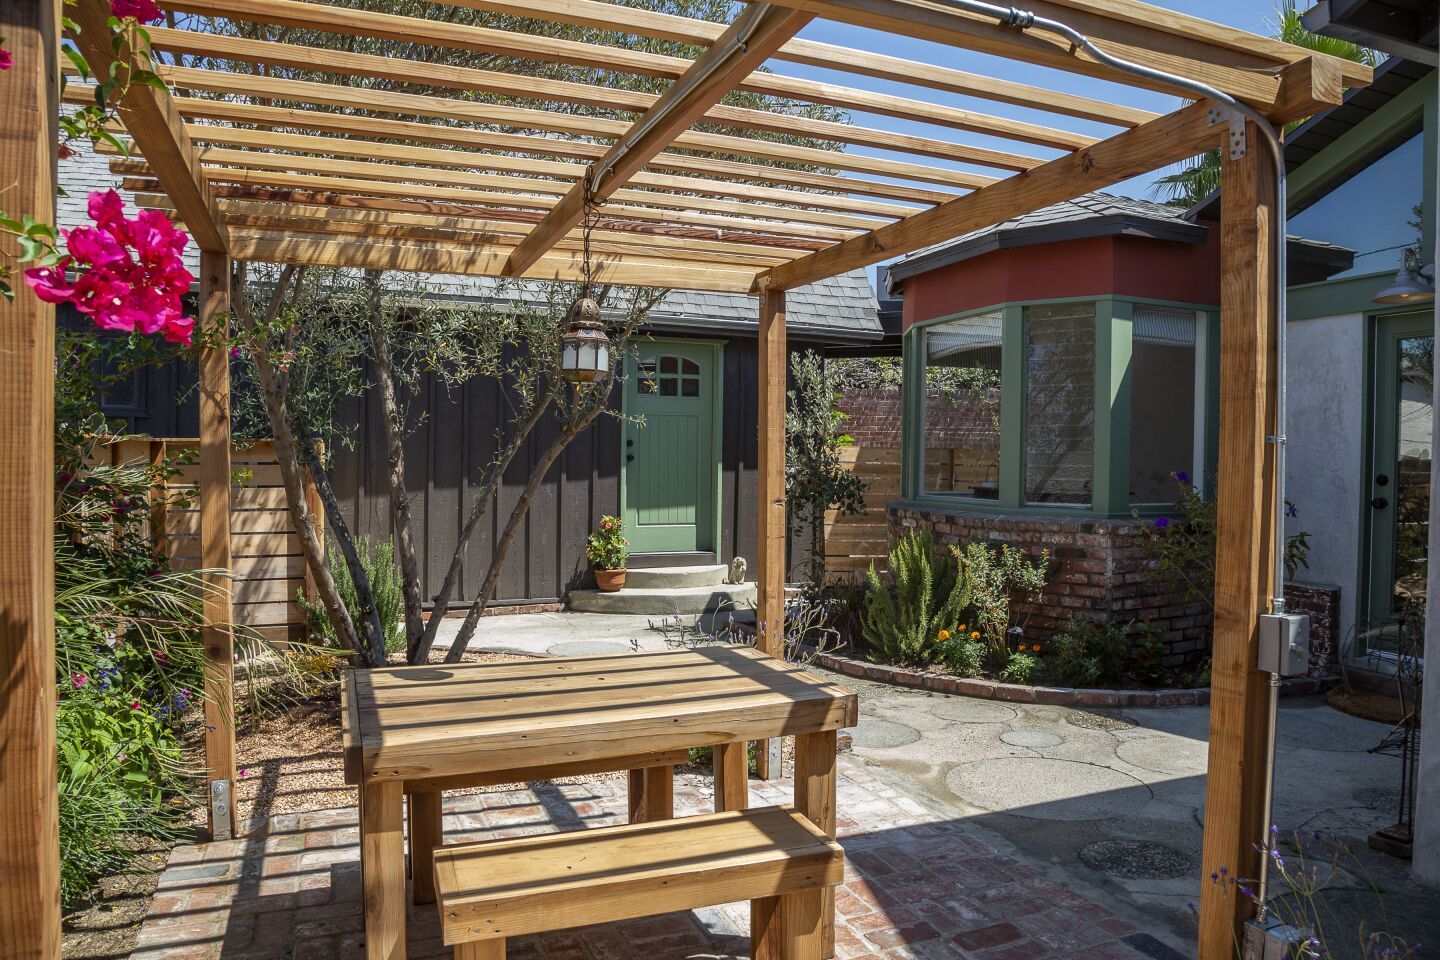 A trellis tops the dining patio.